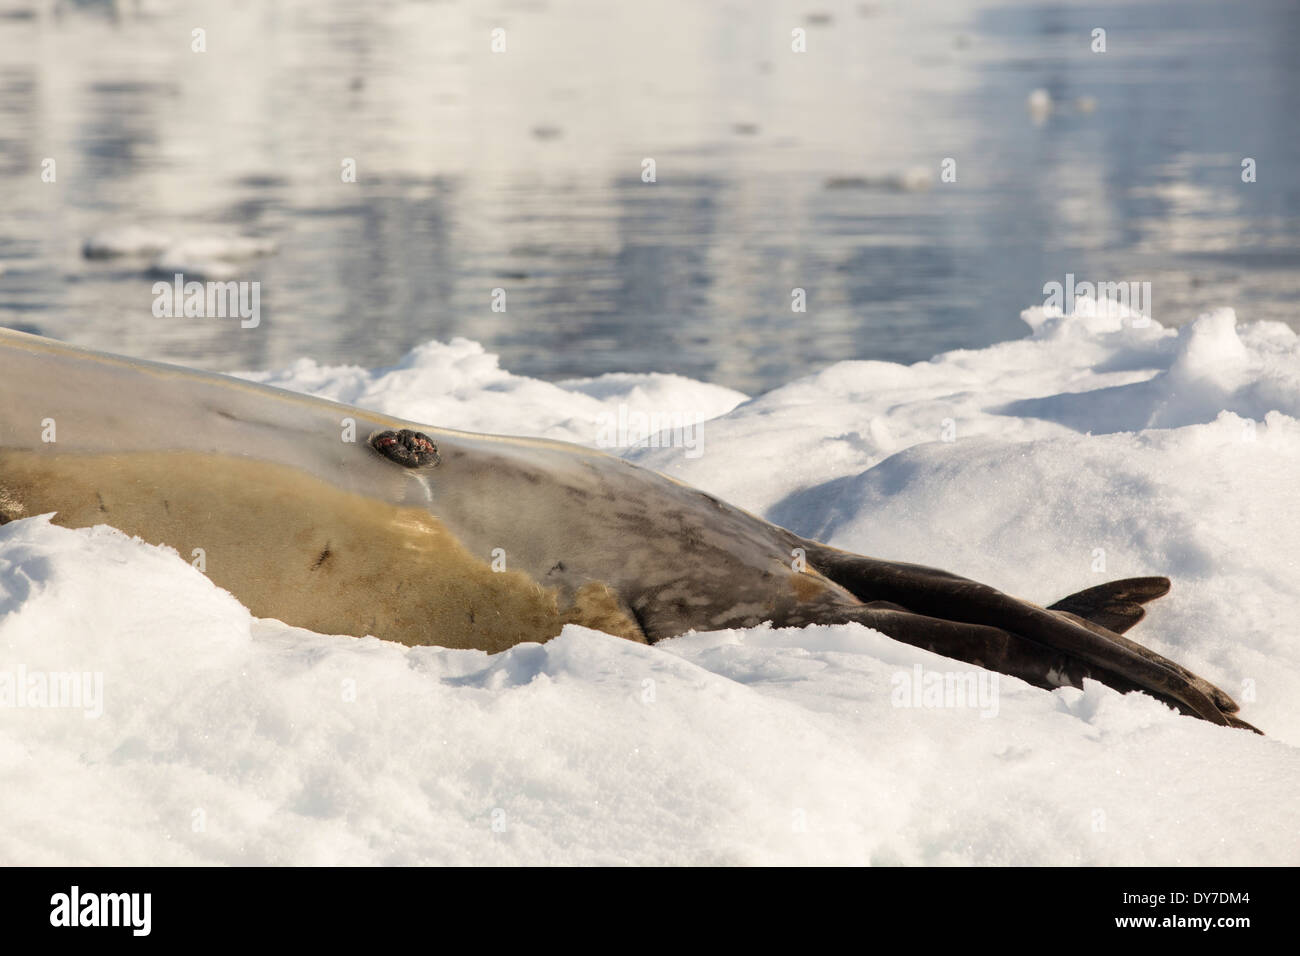 A male Leopard Seal (Hydrurga leptonyx) hauled out on an iceberg in the Drygalski Fjord, Antarctic Peninsular. Stock Photo